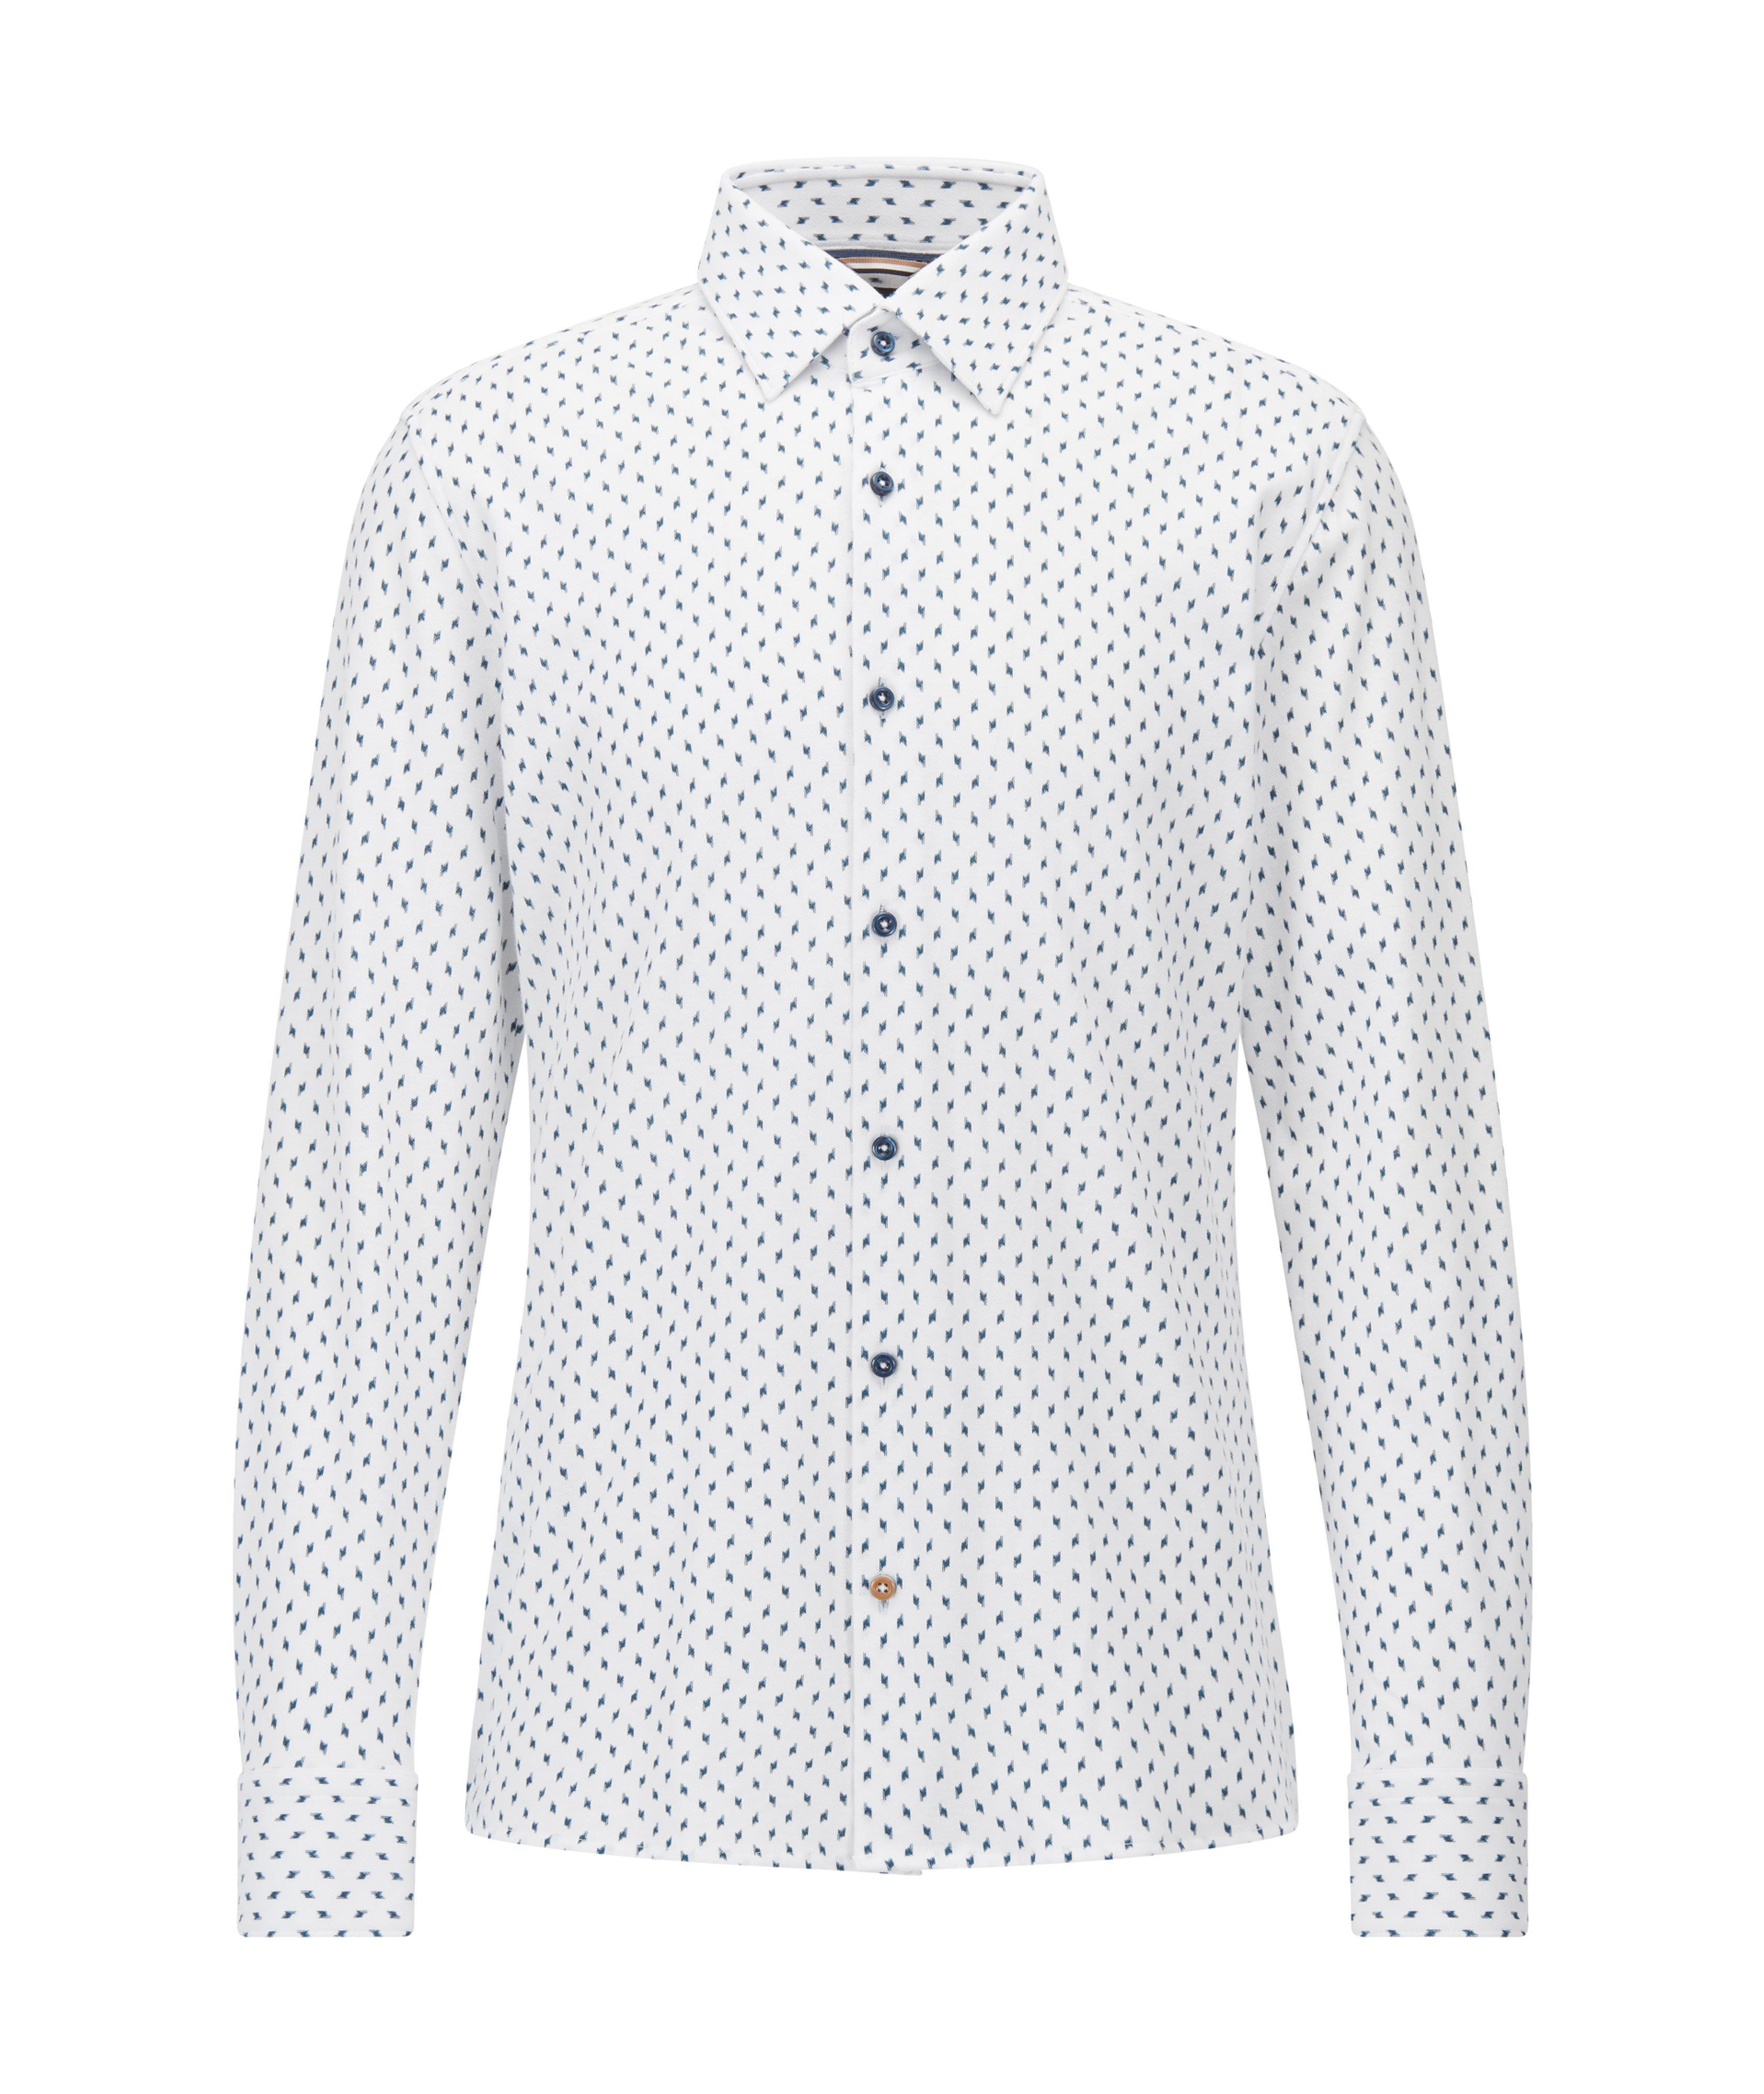 Slim-Fit Shirt In Printed Cotton Jersey  image 0